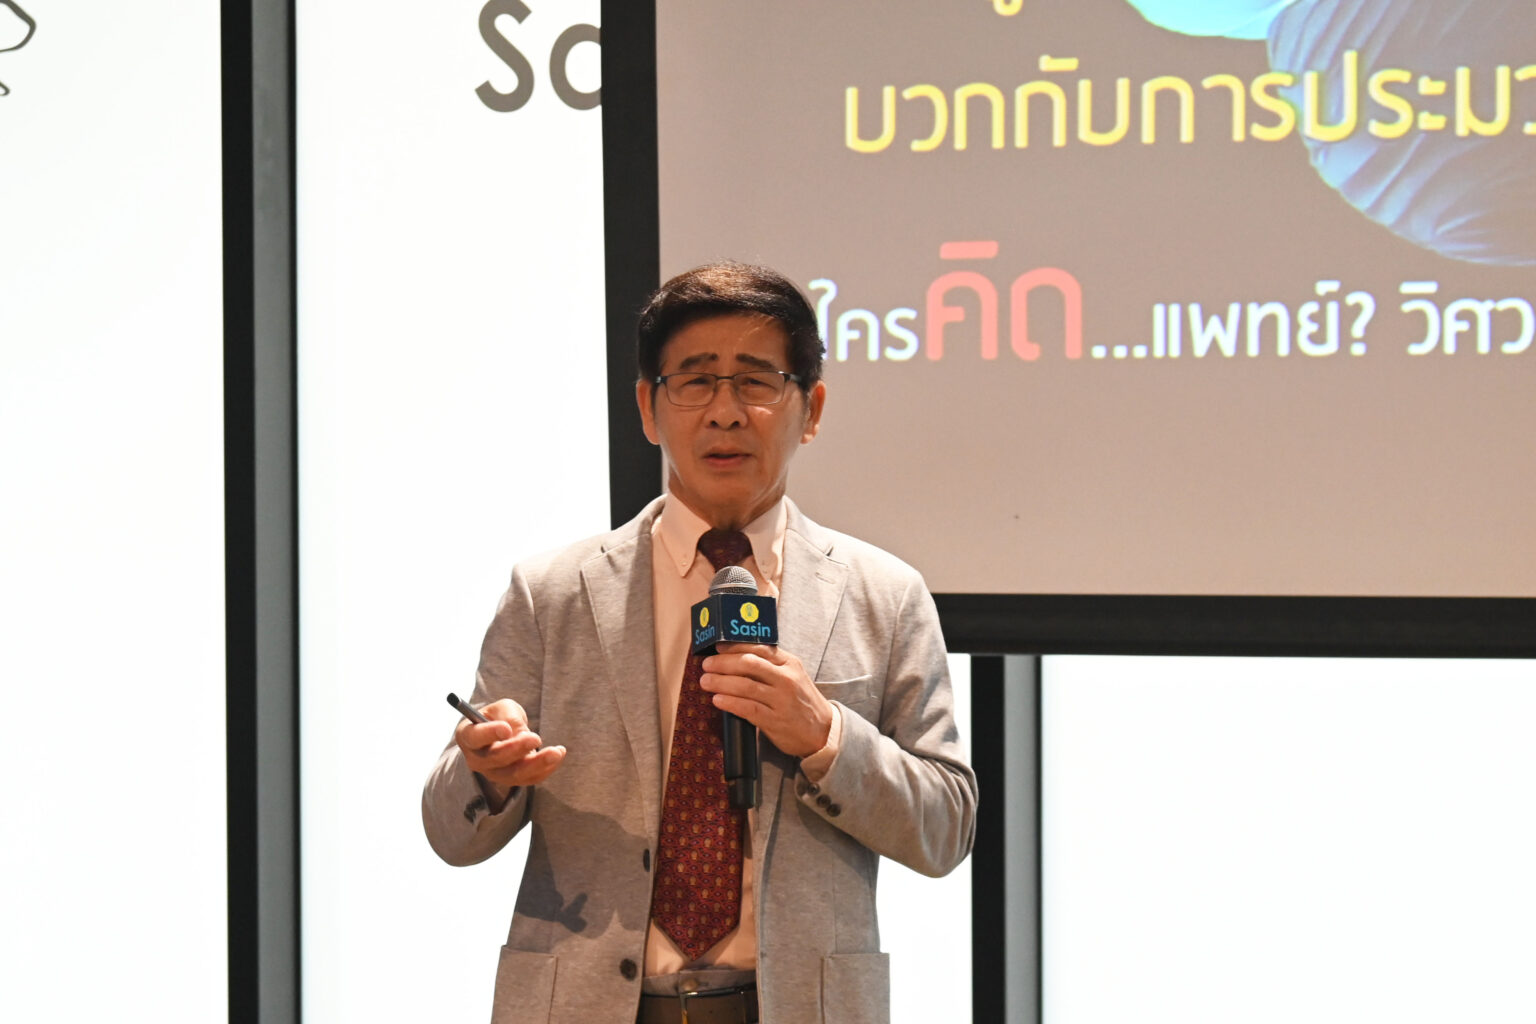 Prof. Emeritus Dr. Soottiporn Chittmittrapap,  
Head of Chulalongkorn University’s Research and Innovation Policy Committee  